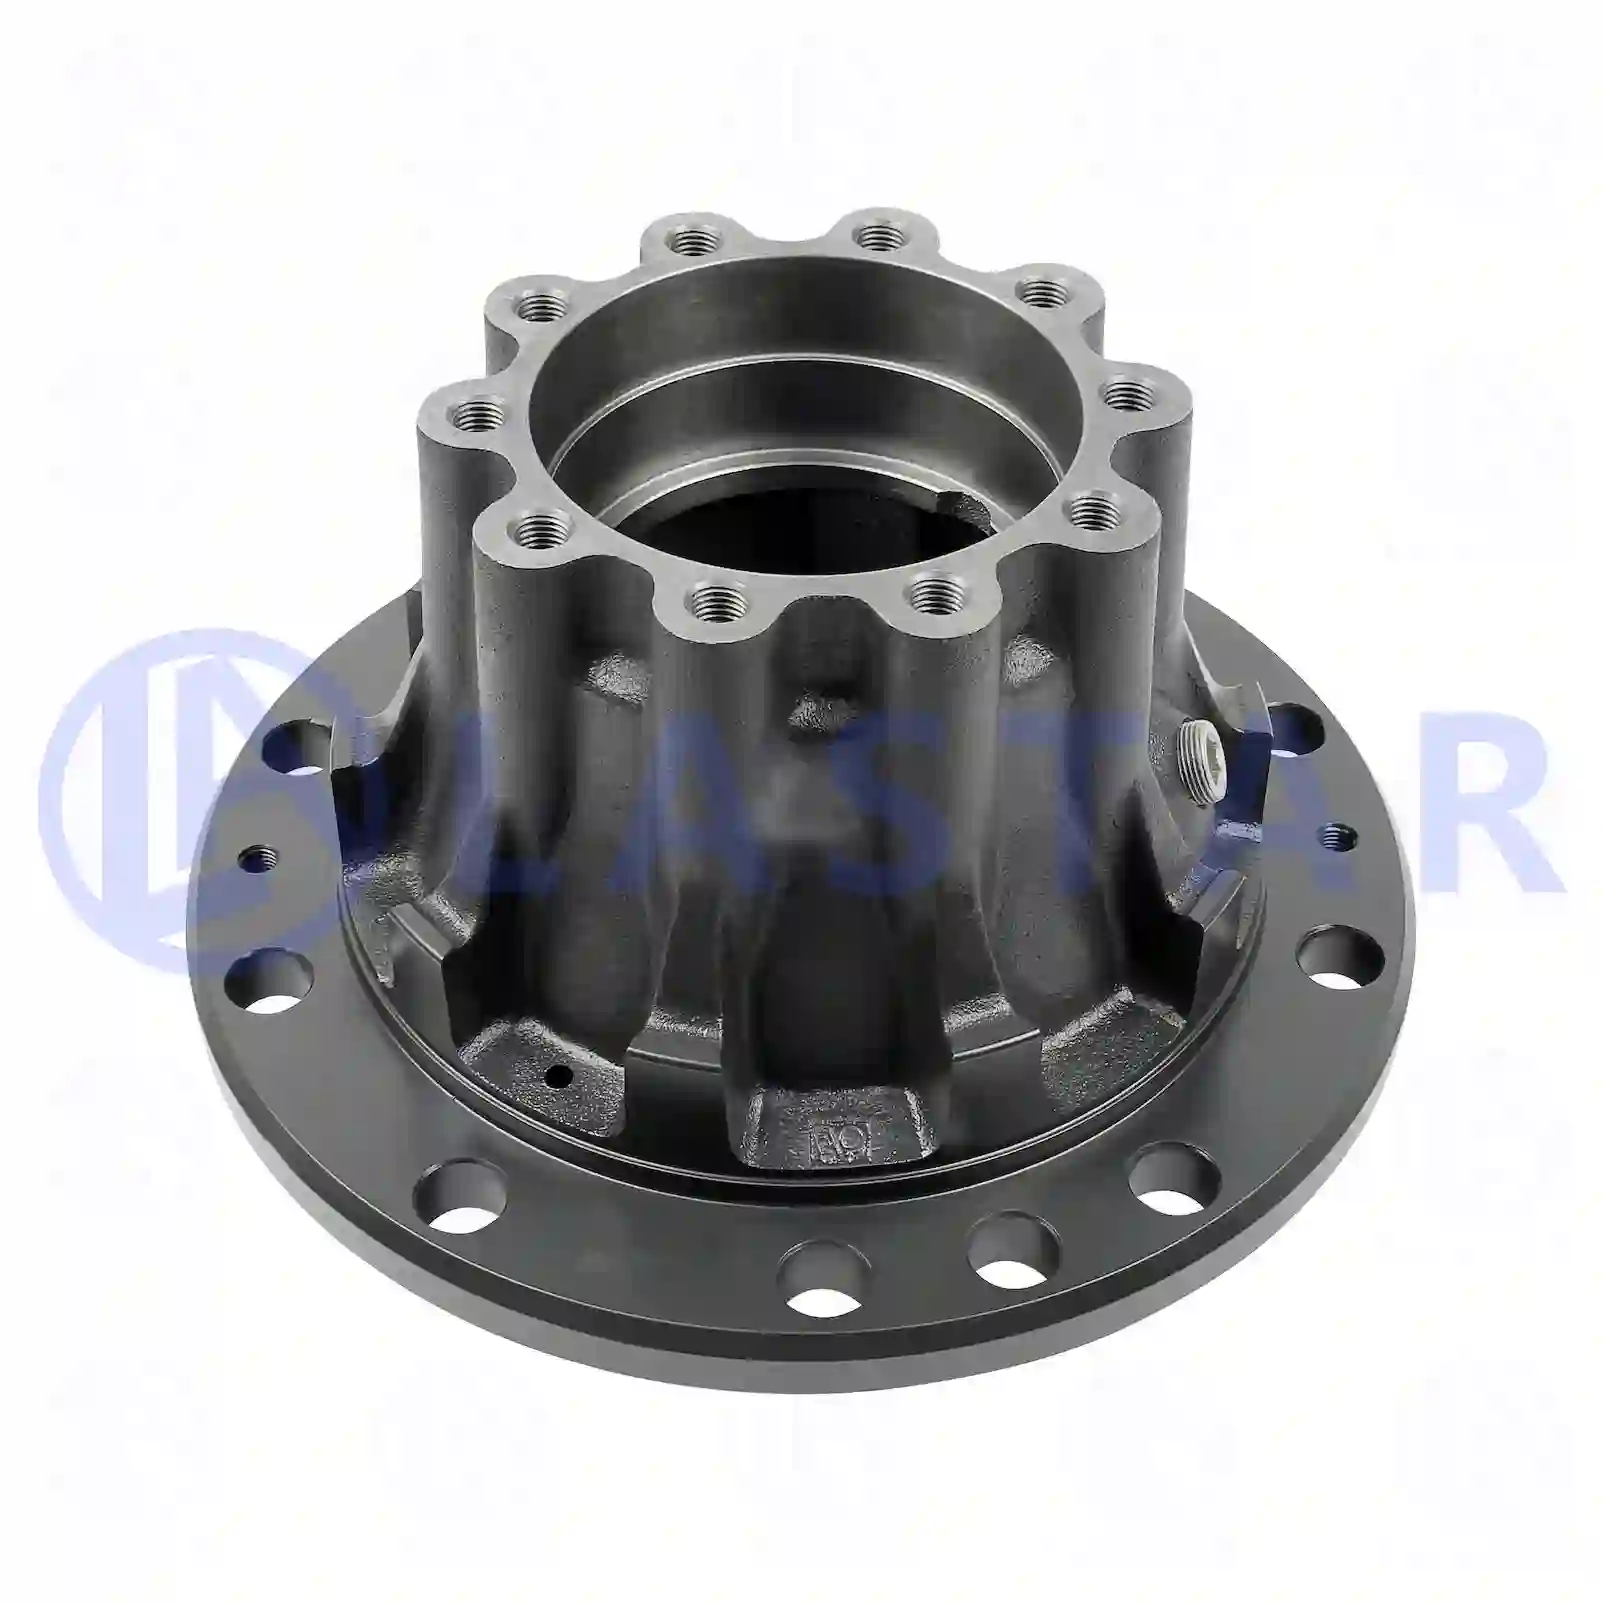 Wheel hub, without bearings, 77726533, 0538444, 1275024, 1348432, 538444, ZG30234-0008, ||  77726533 Lastar Spare Part | Truck Spare Parts, Auotomotive Spare Parts Wheel hub, without bearings, 77726533, 0538444, 1275024, 1348432, 538444, ZG30234-0008, ||  77726533 Lastar Spare Part | Truck Spare Parts, Auotomotive Spare Parts